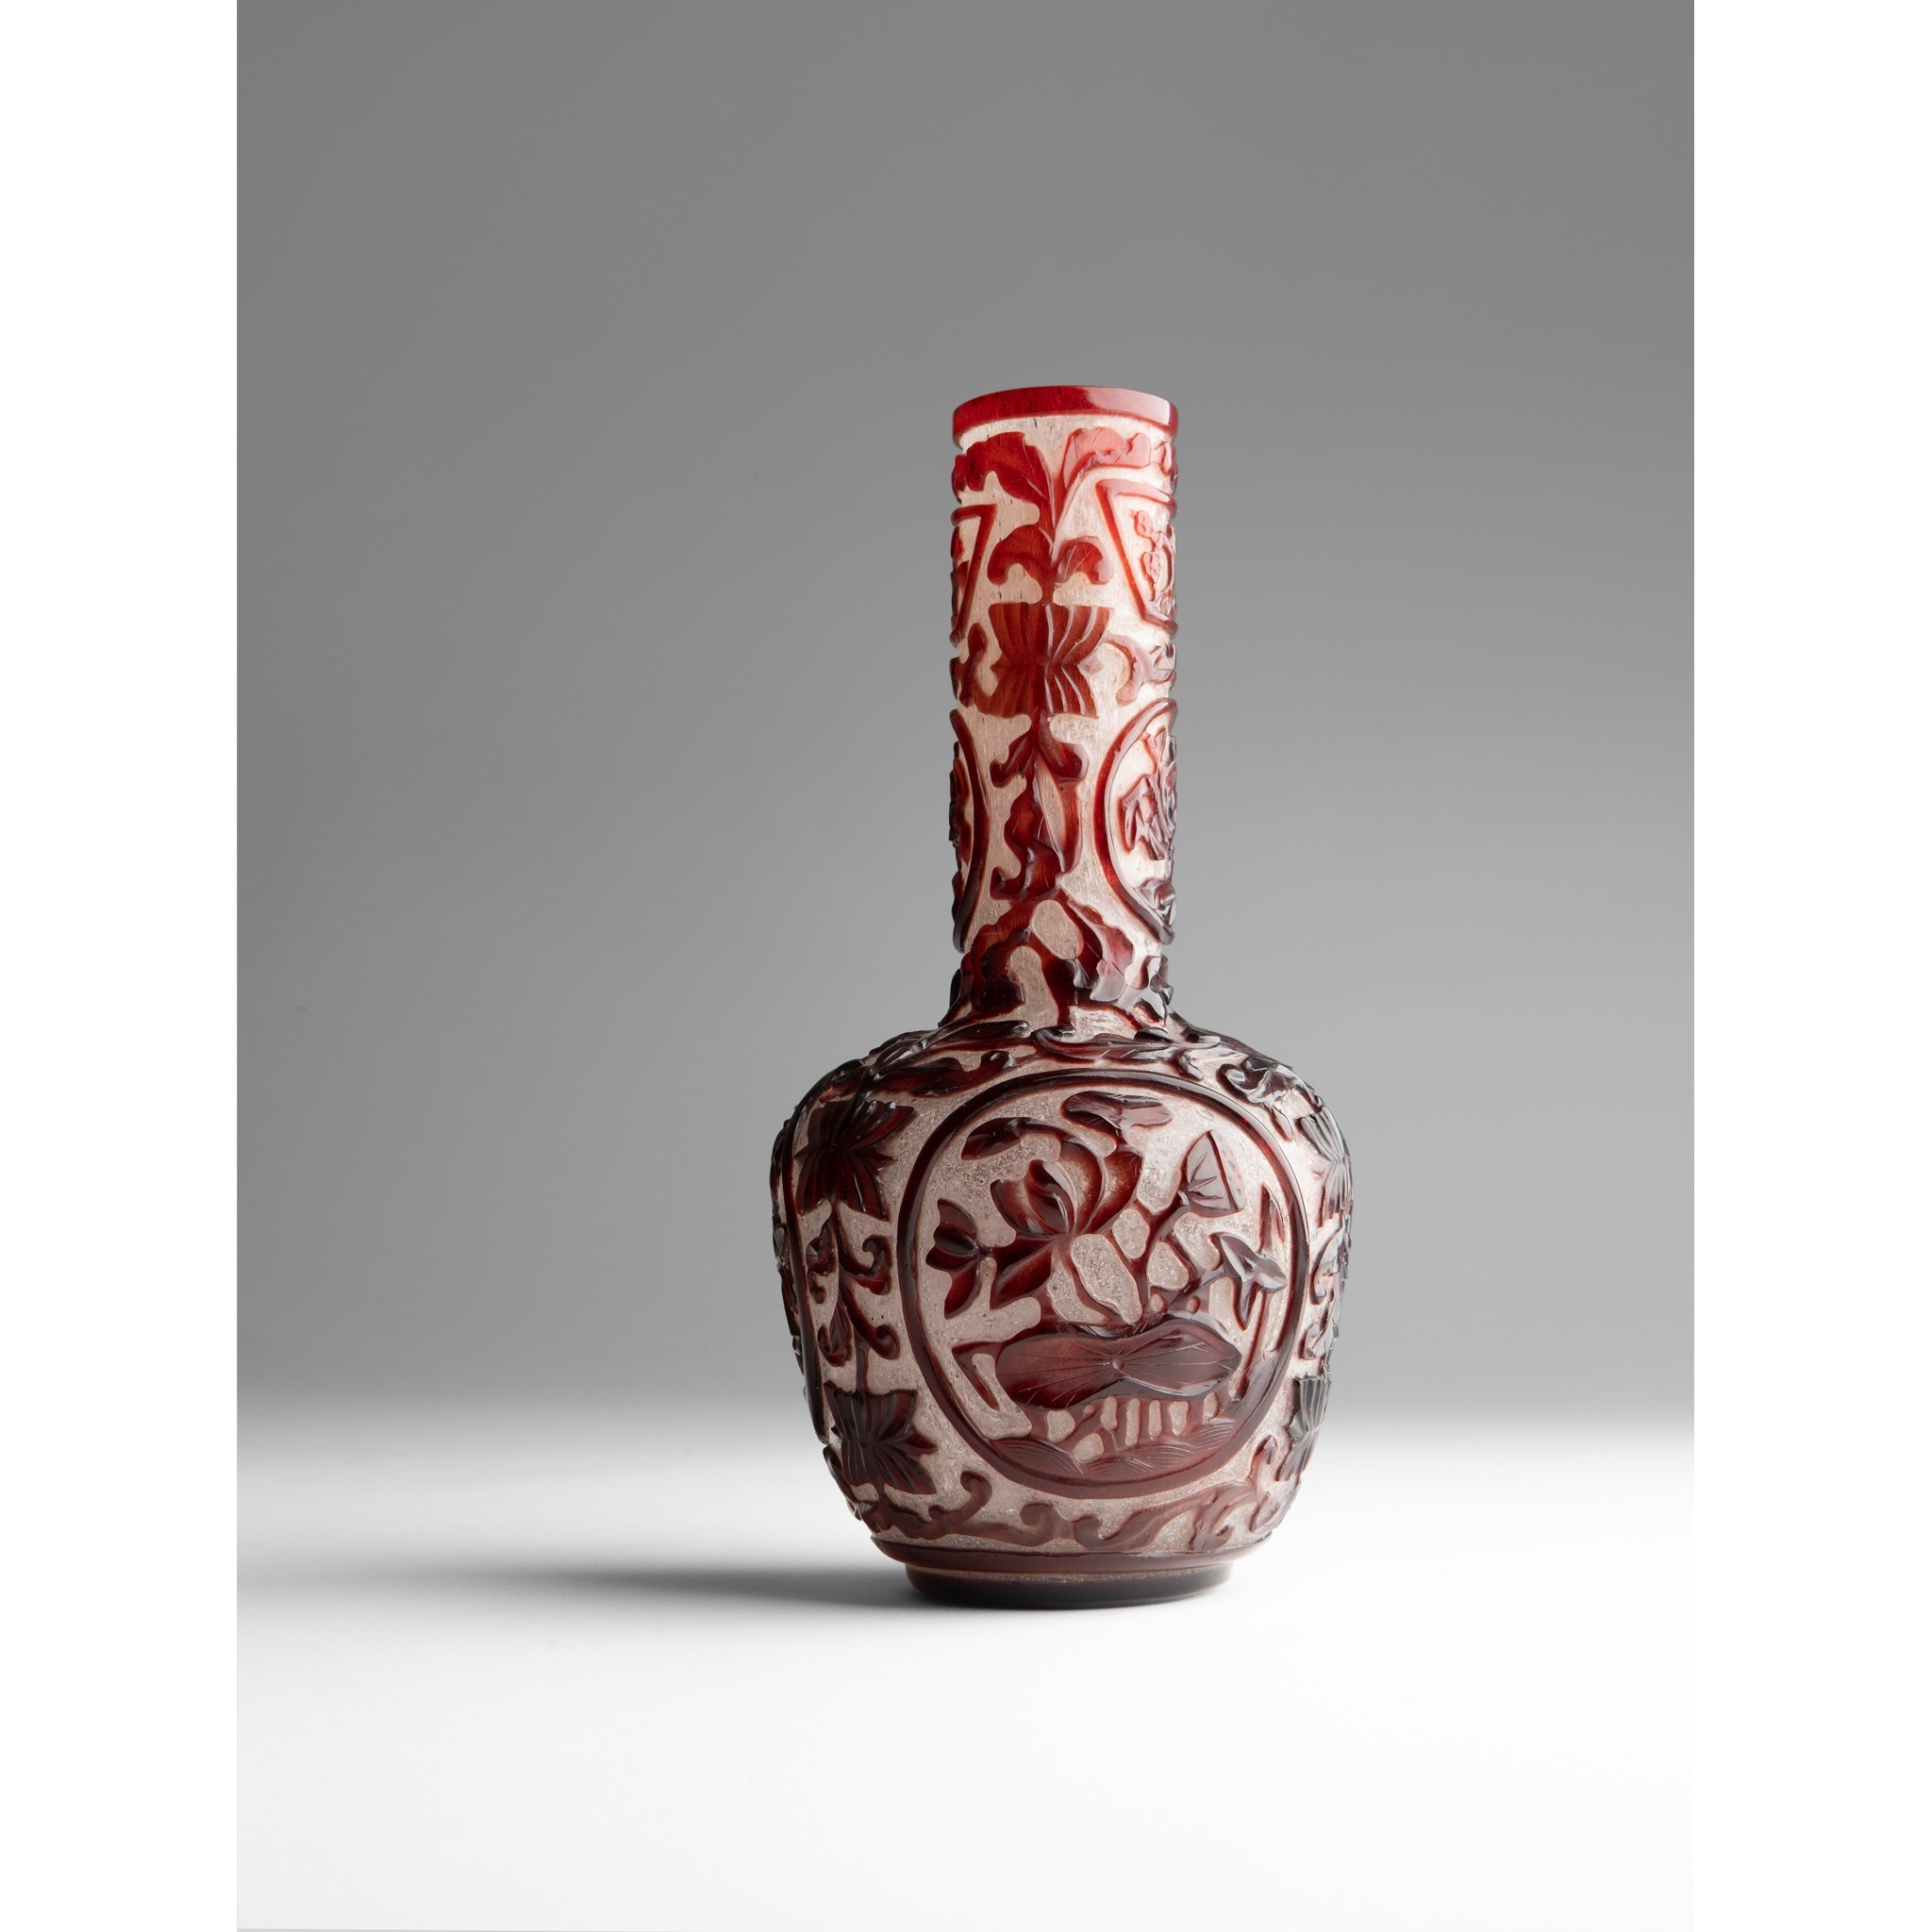 IMPERIAL RED-OVERLAY TRANSLUCENT GLASS BOTTLE VASE QIANLONG MARK AND OF THE PERIOD